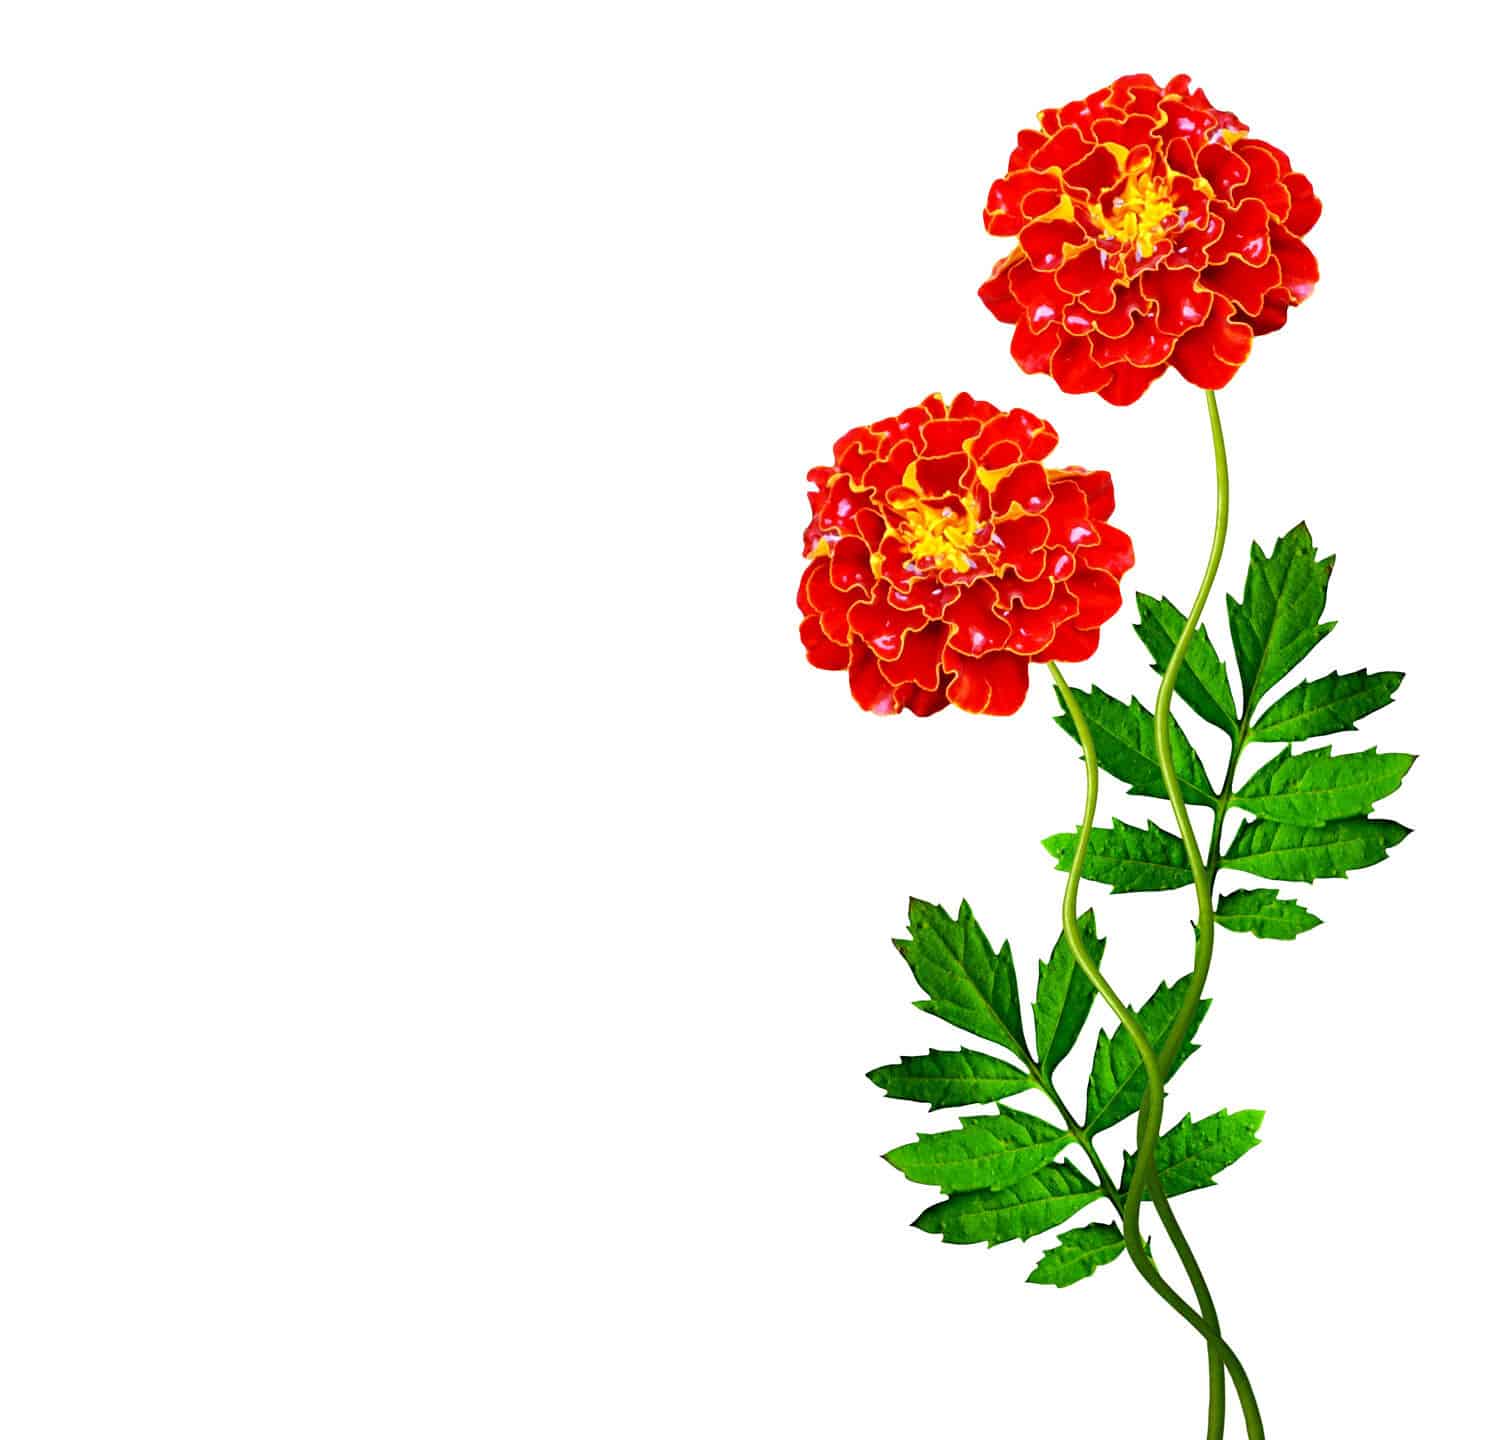 bright colorful flowers marigolds isolated on white background